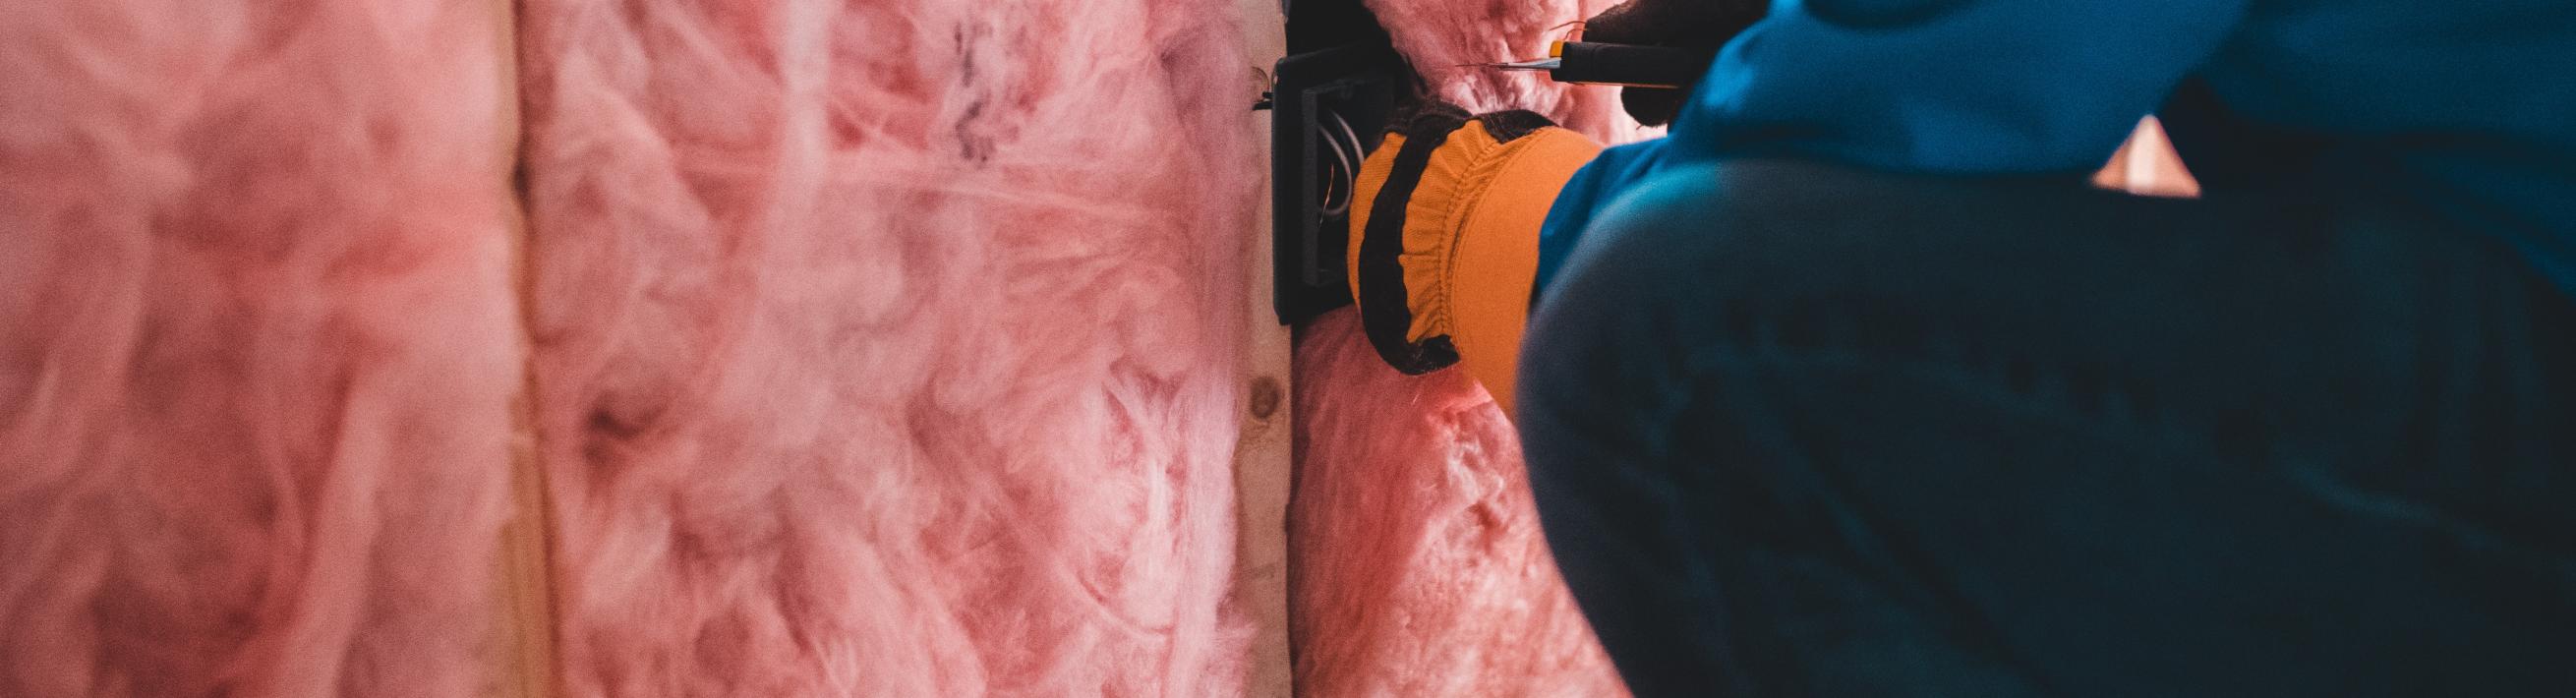 Power tool being used on insulation